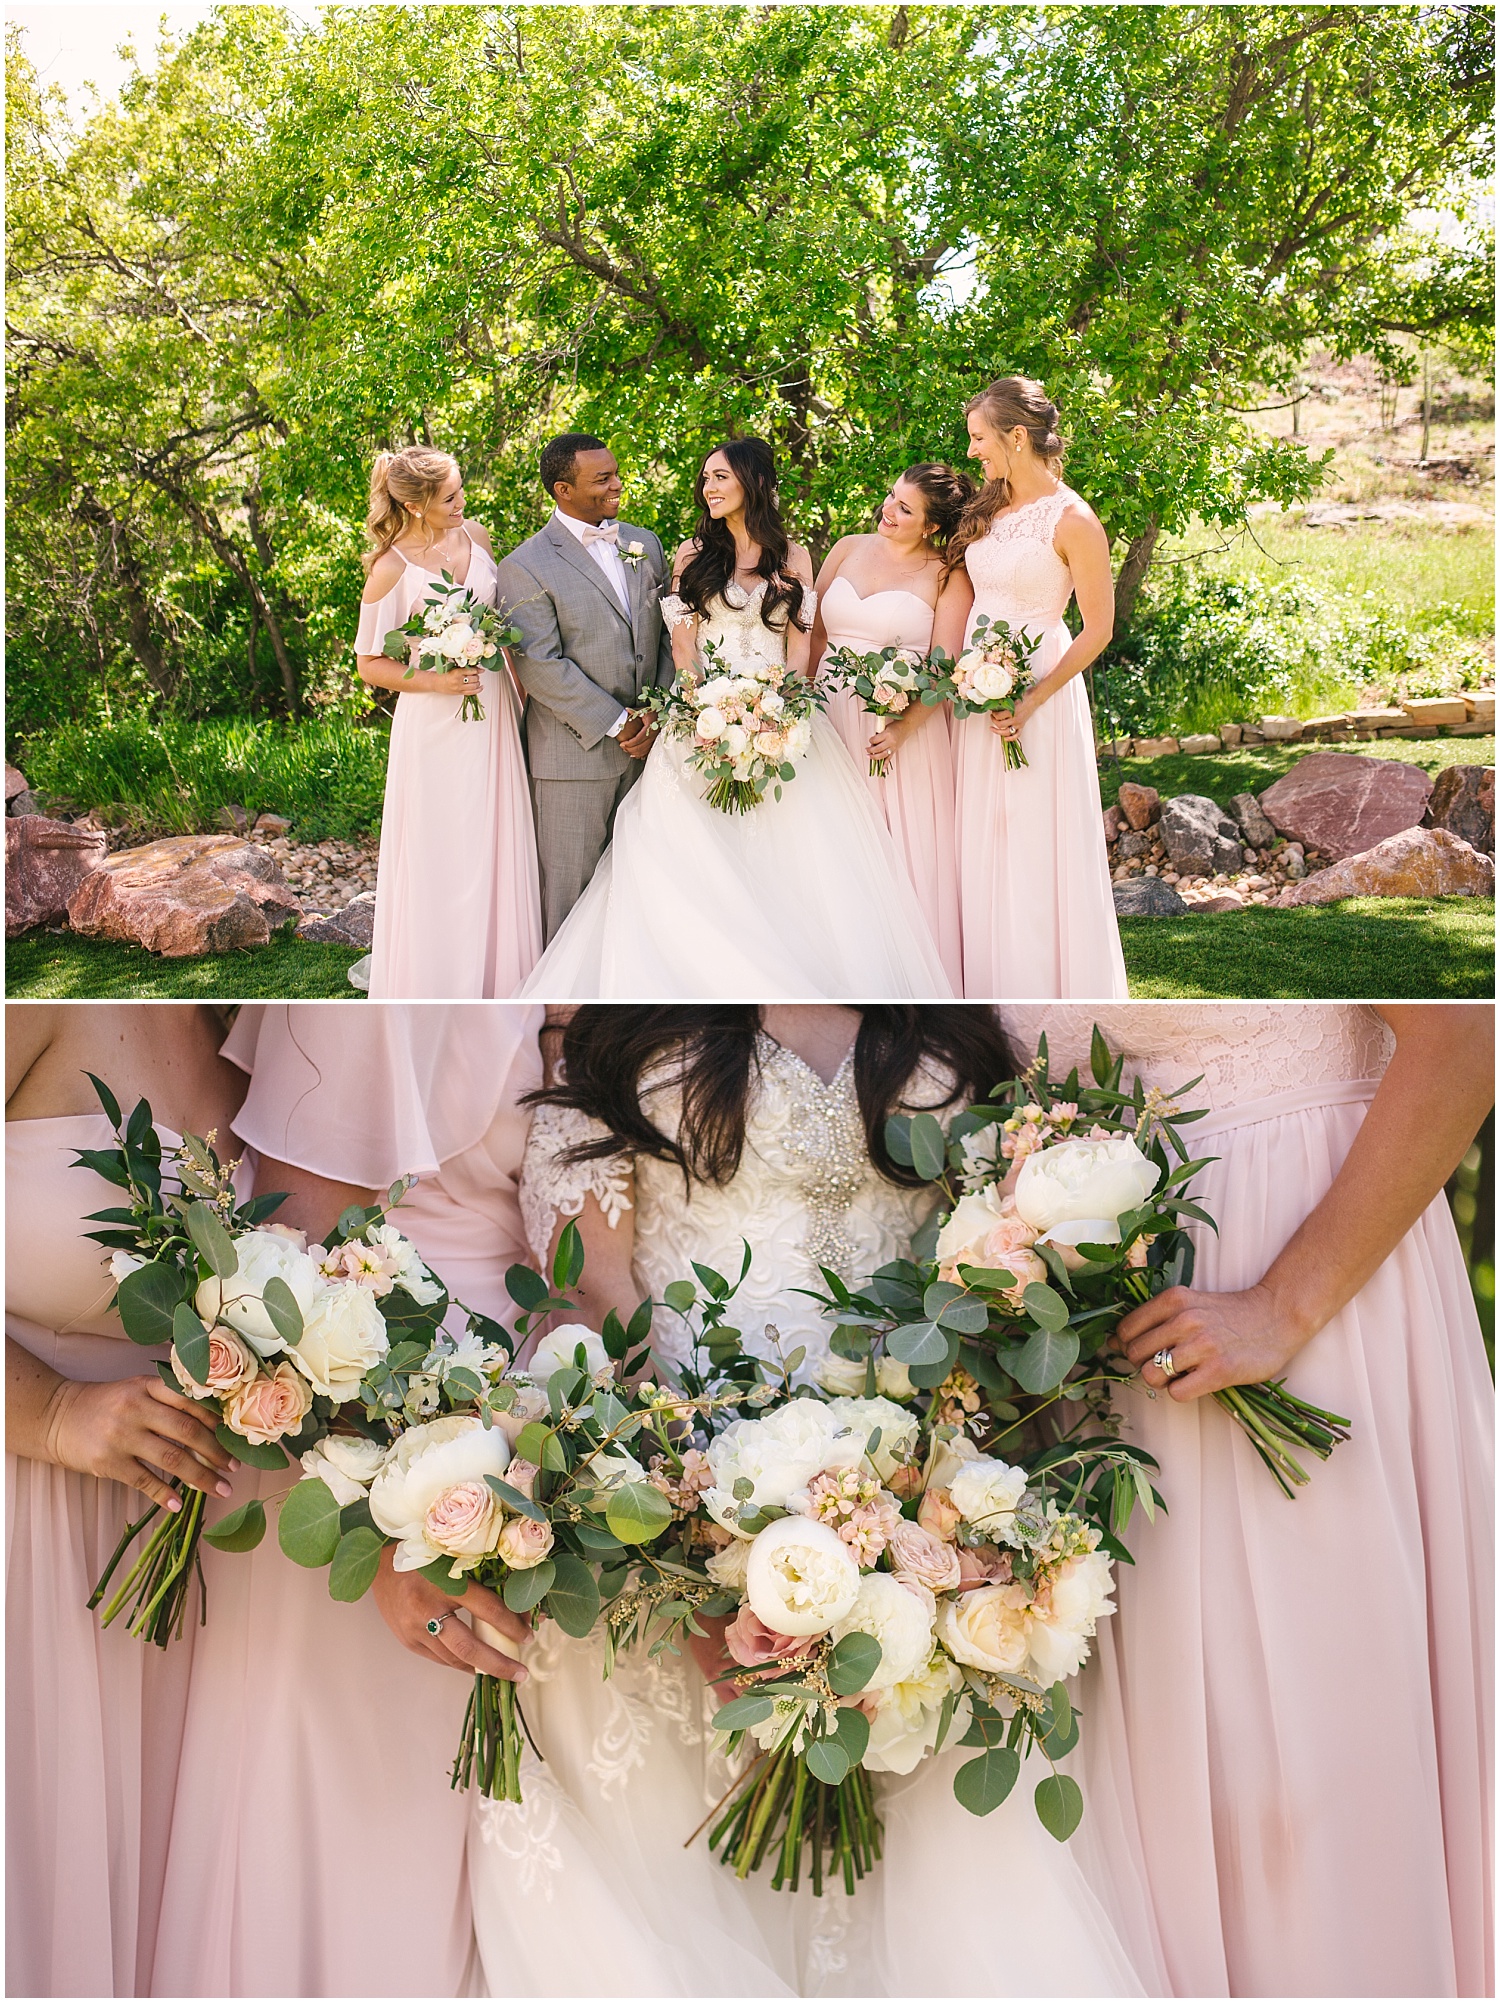 Pink, white, and grey color palette for bridal party